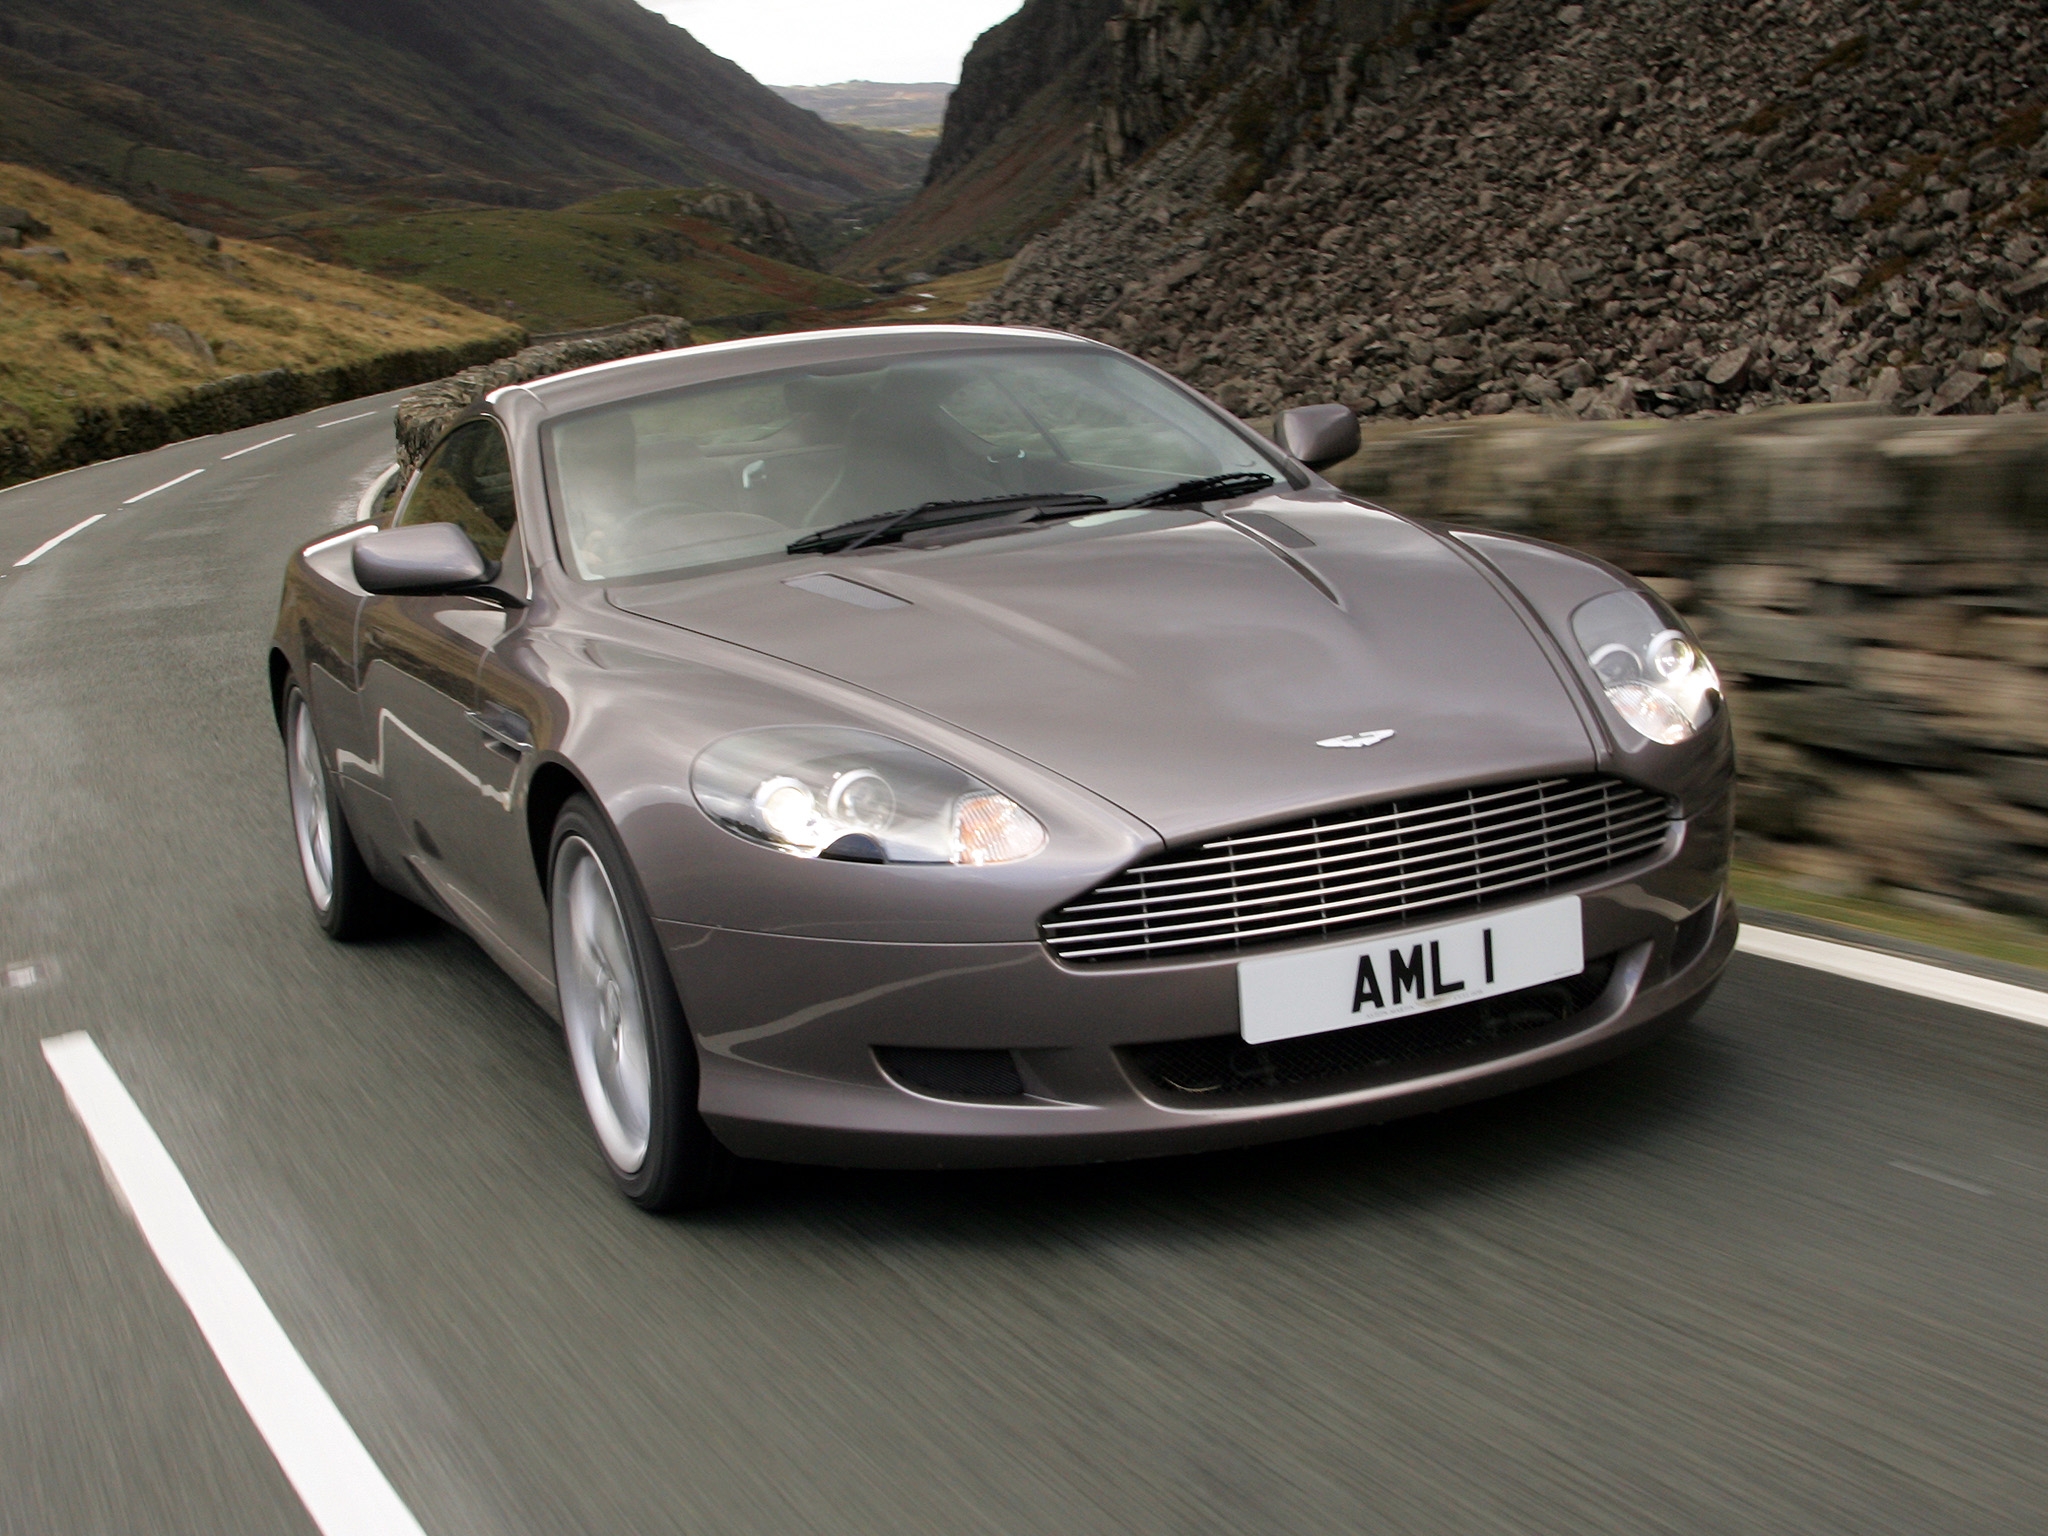 Download PC Wallpaper auto, mountains, aston martin, cars, asphalt, front view, grey, speed, style, 2004, db9